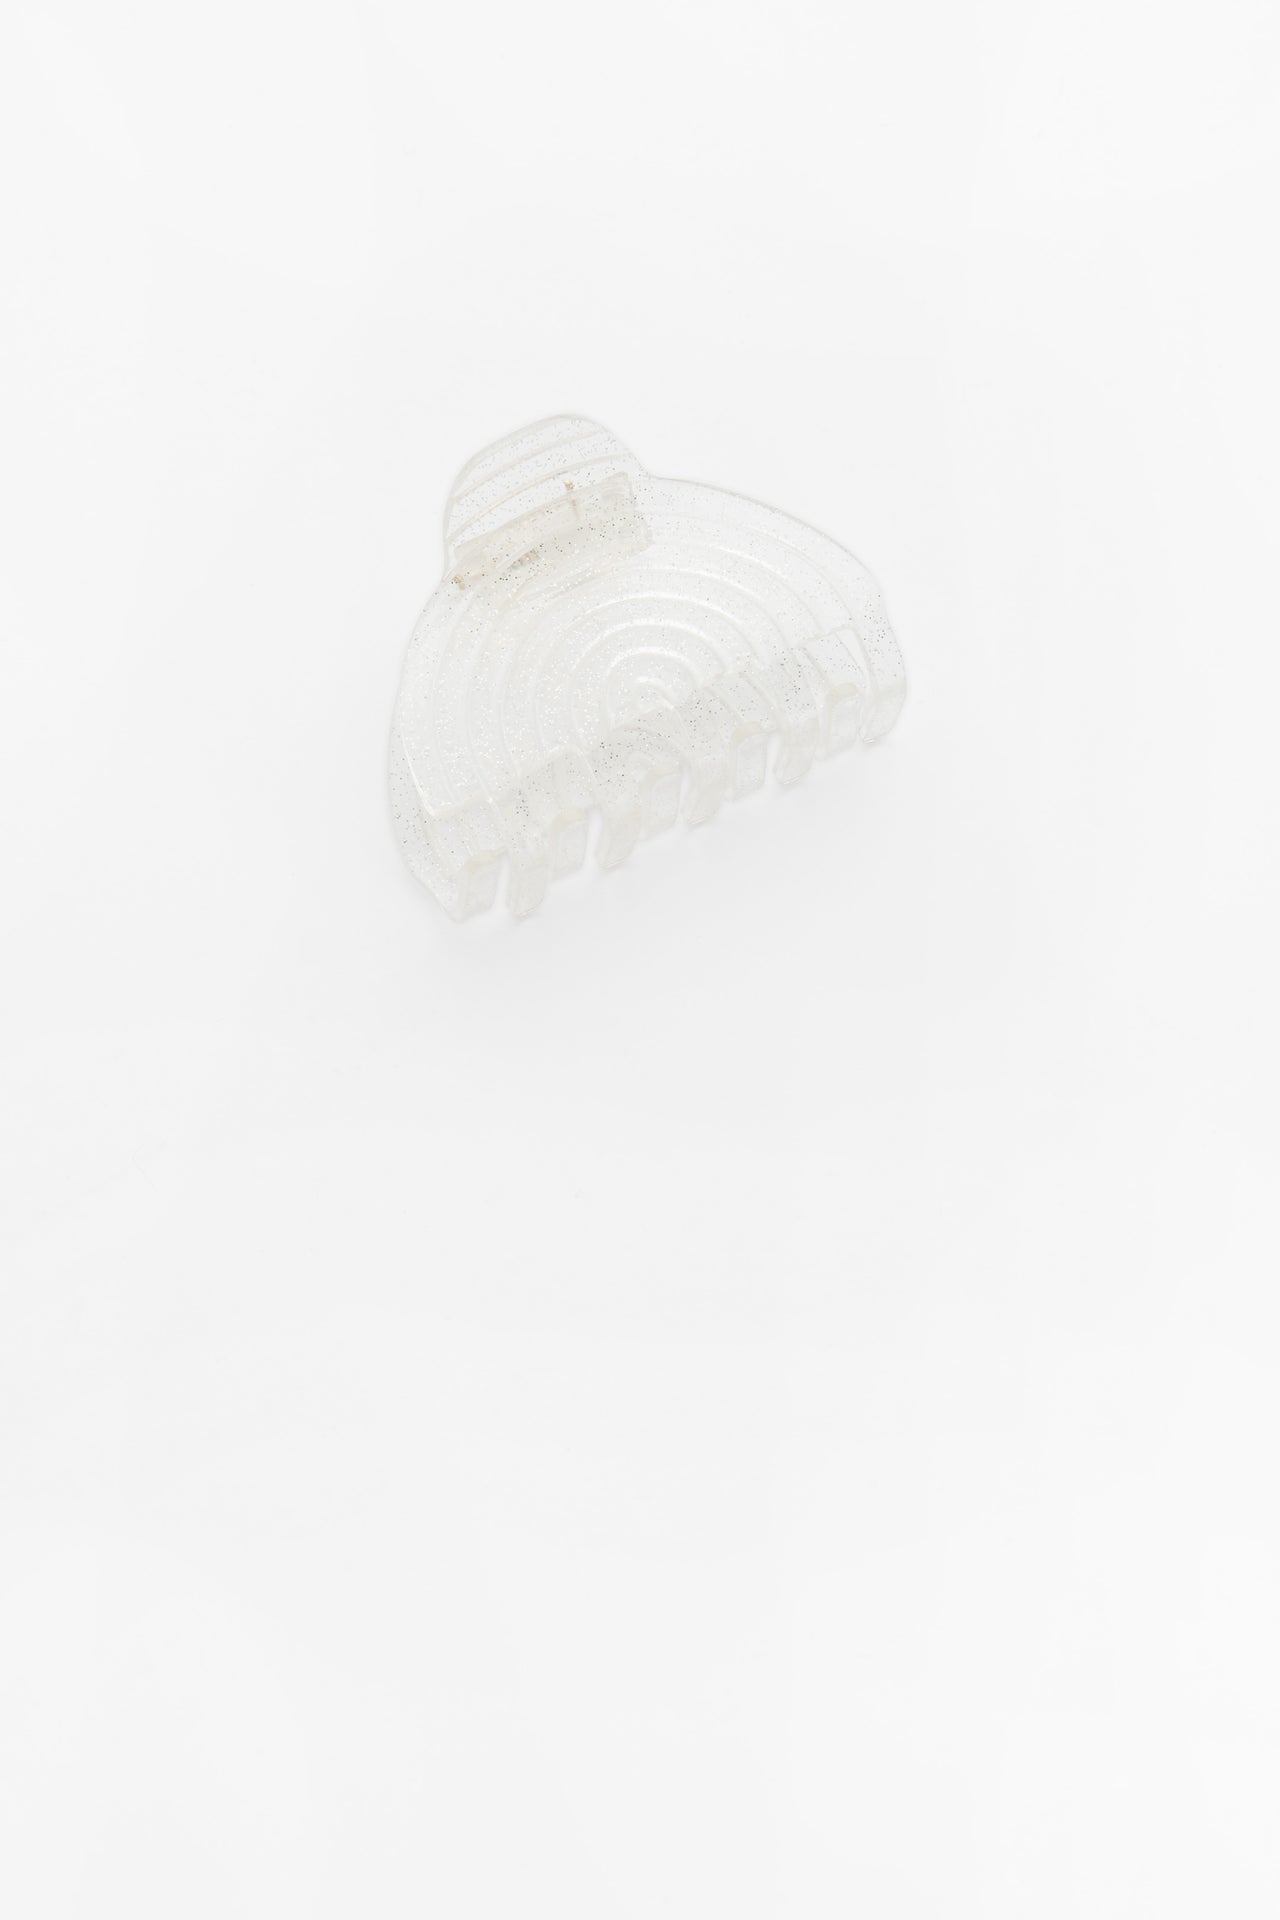 Airlie Clip in Clear